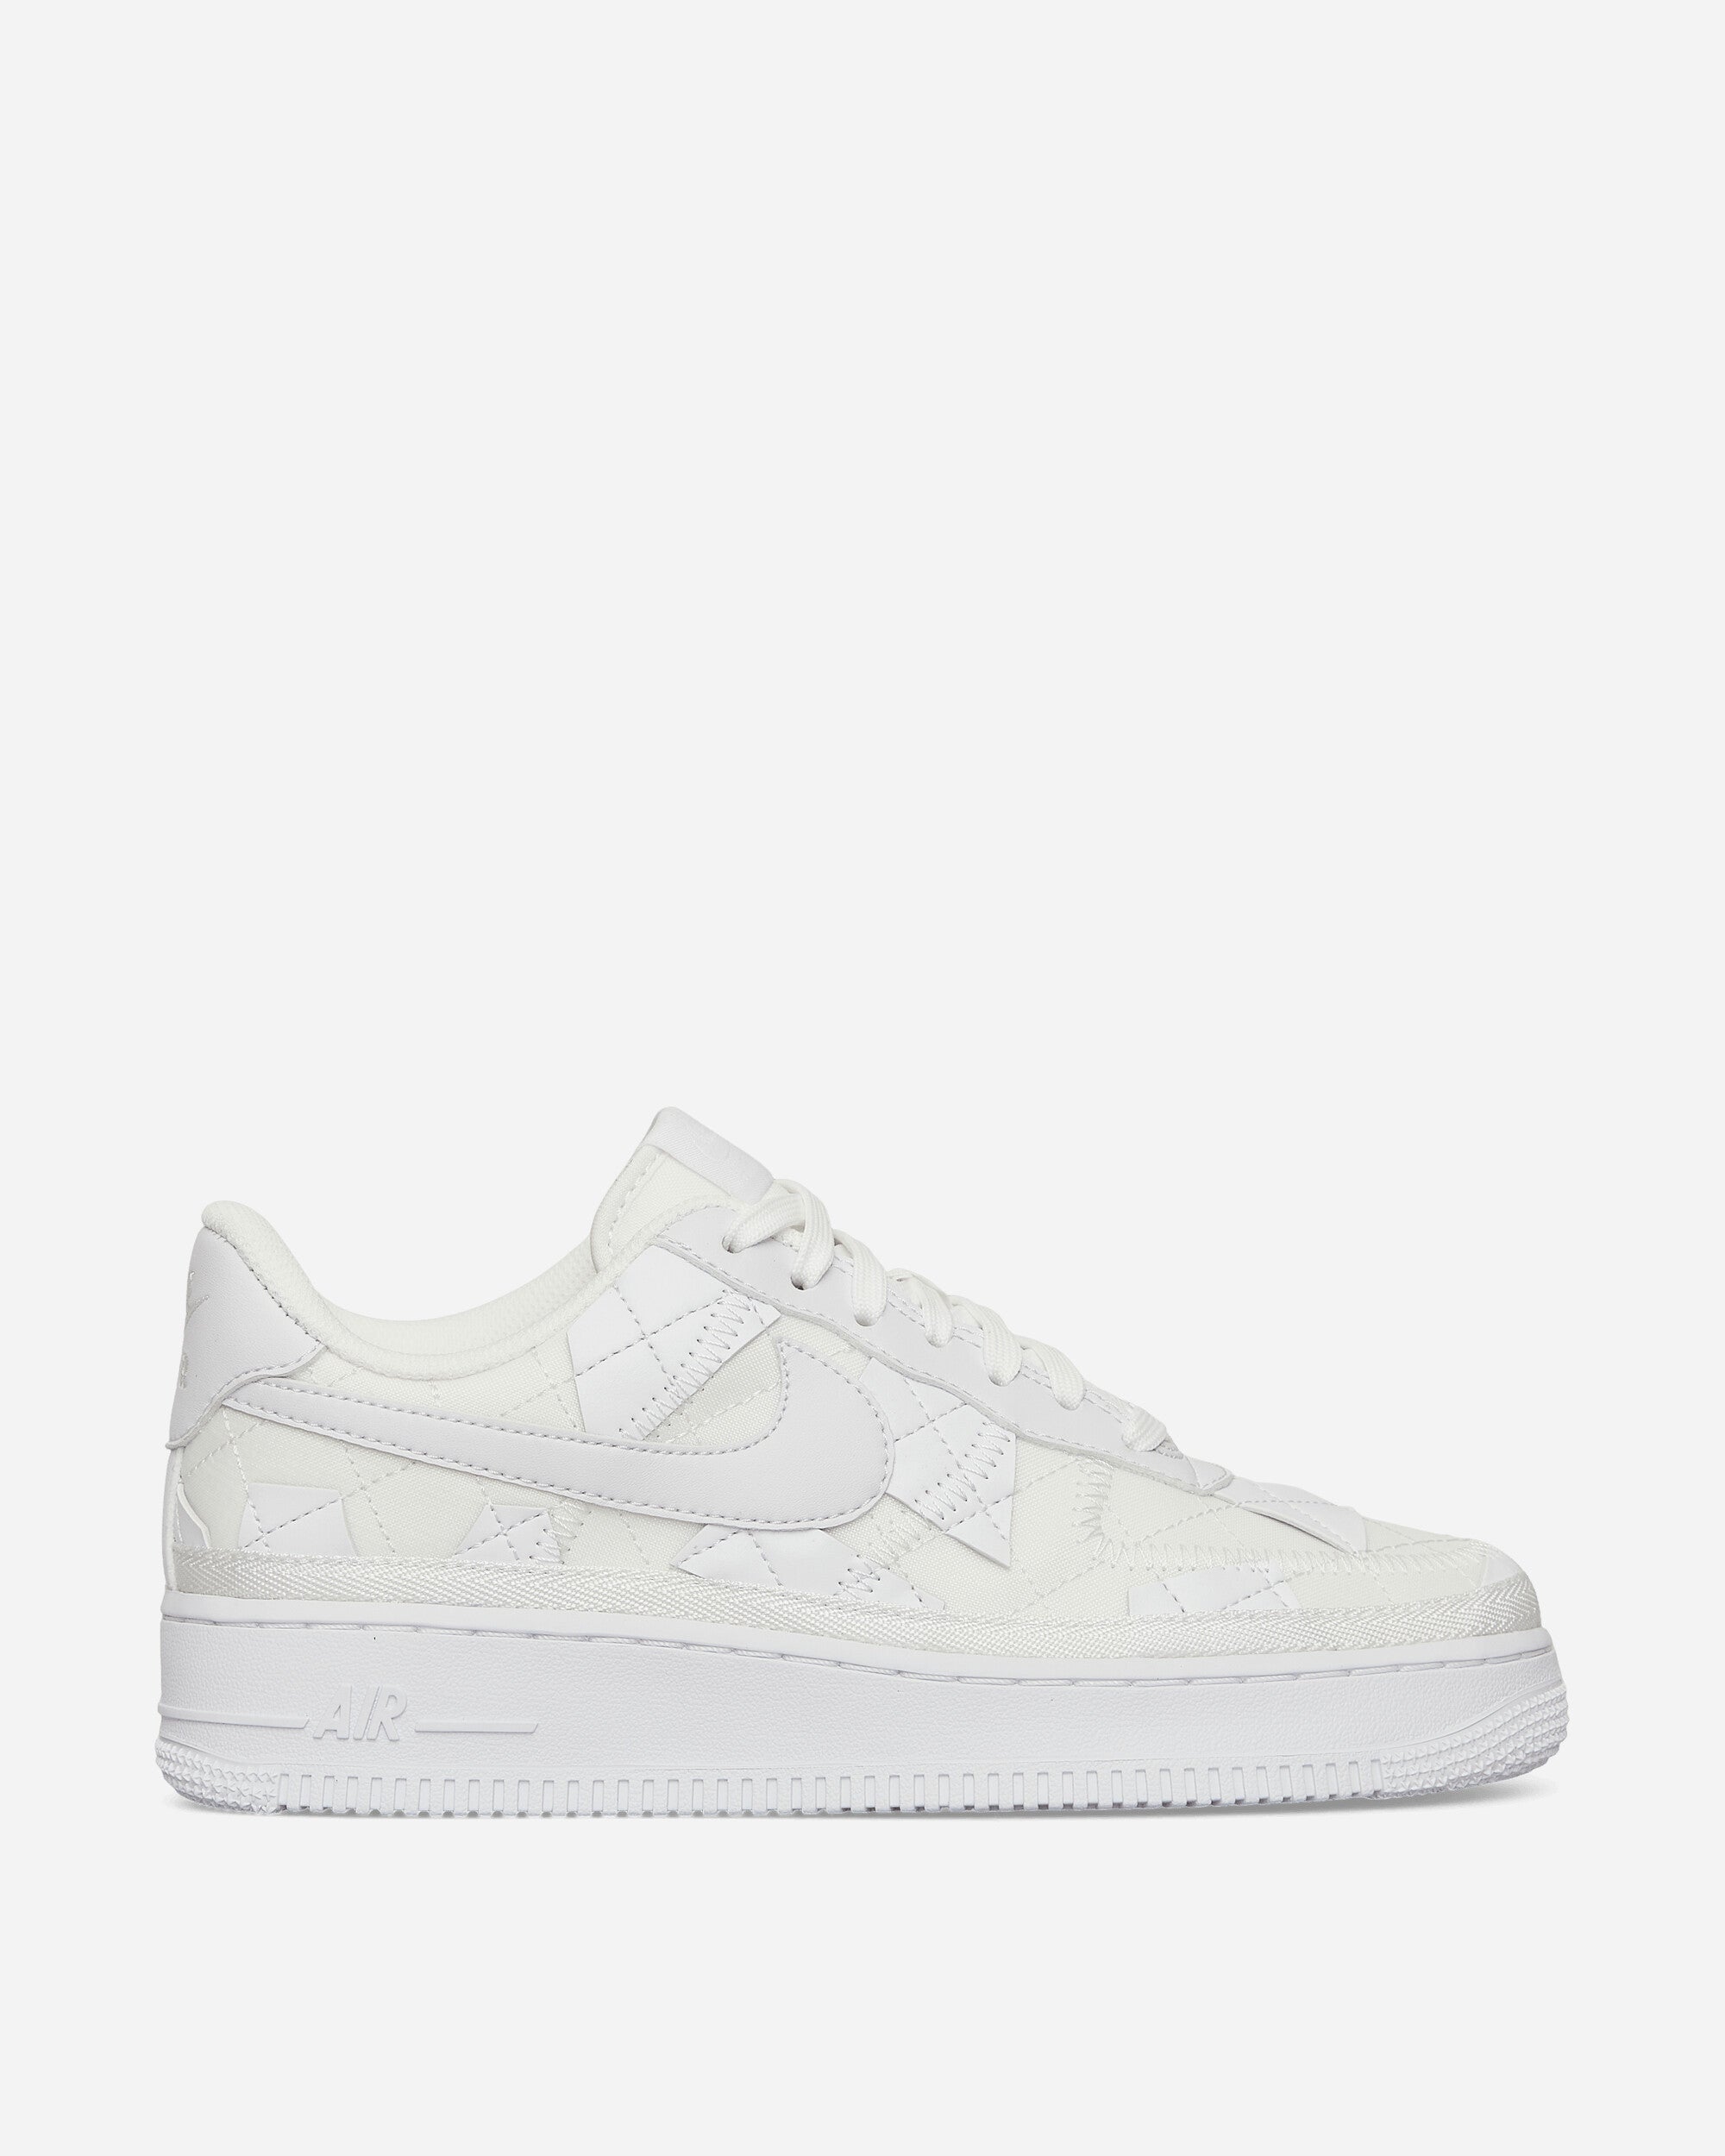 Nike Billie Eilish Air Force 1 Low Trainers Triple In White | ModeSens